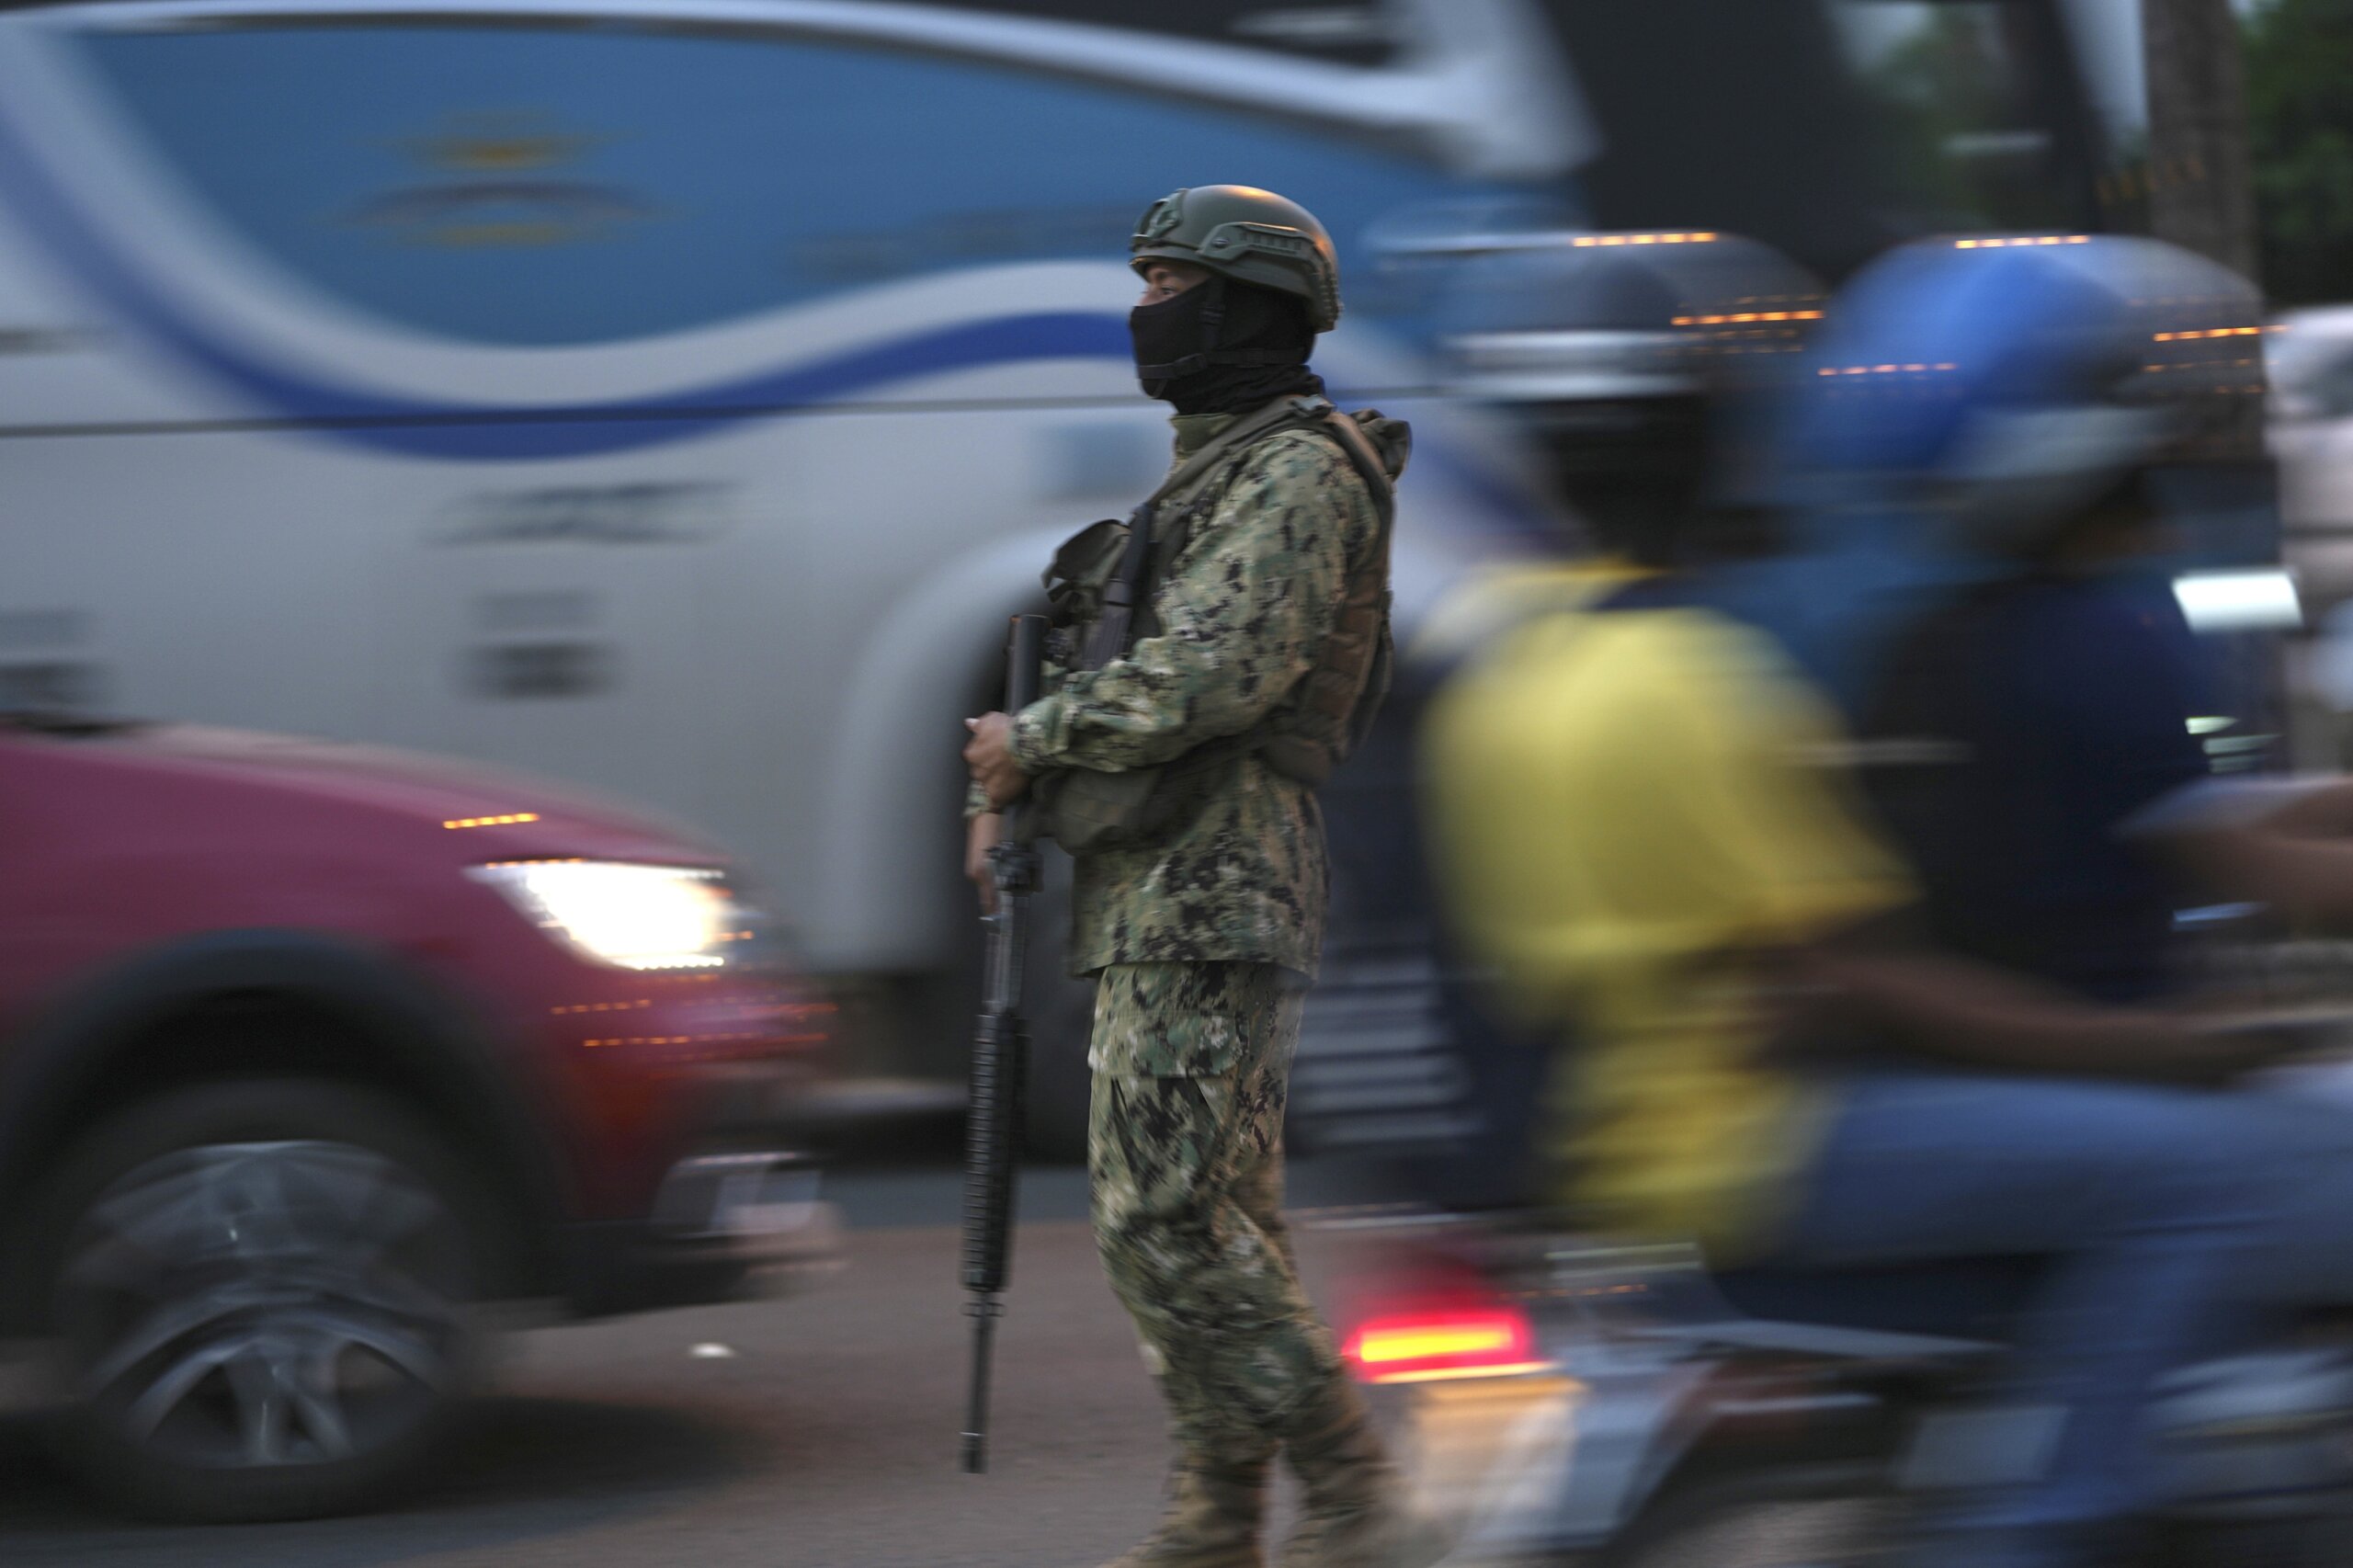 Ecuador was calm and peaceful. Now hitmen, kidnappers and robbers walk